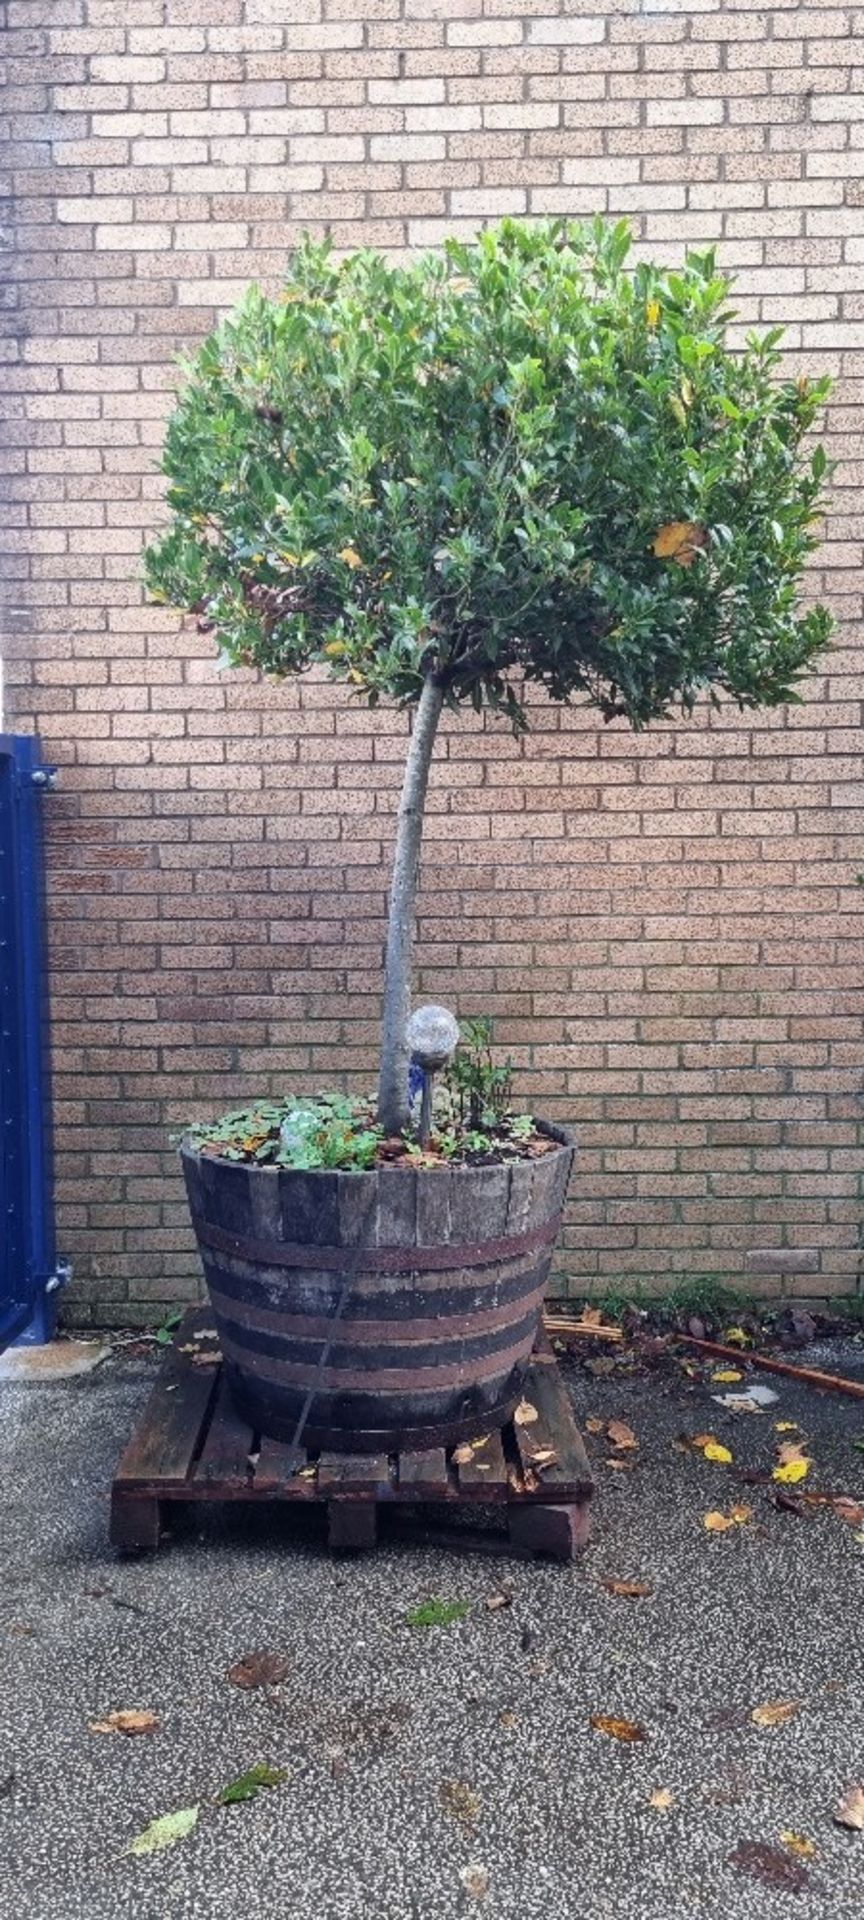 Bay Tree In Barrell Planter | Approx Height: 2.7m - Image 2 of 6